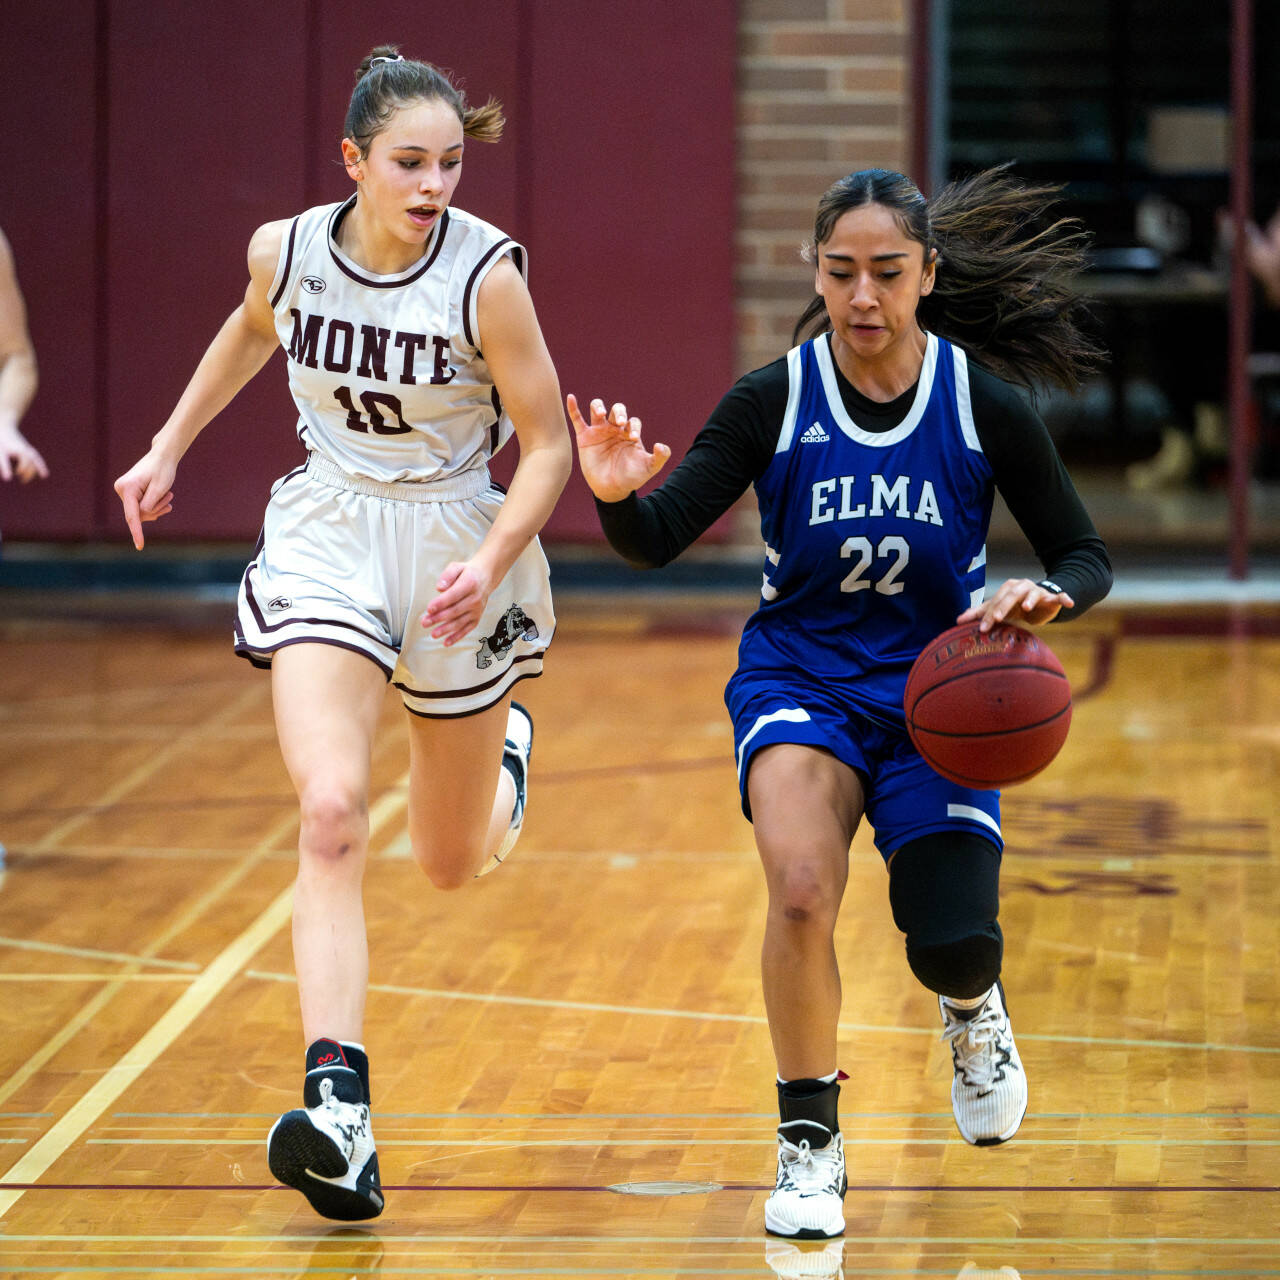 PHOTO BY FOREST WORGUM
Montesano’s Lex Stanfield (10) and Elma’s Eliza Sibbett (22) were both named to the 1A Evergreen All-League First Team for the 2023-24 season.